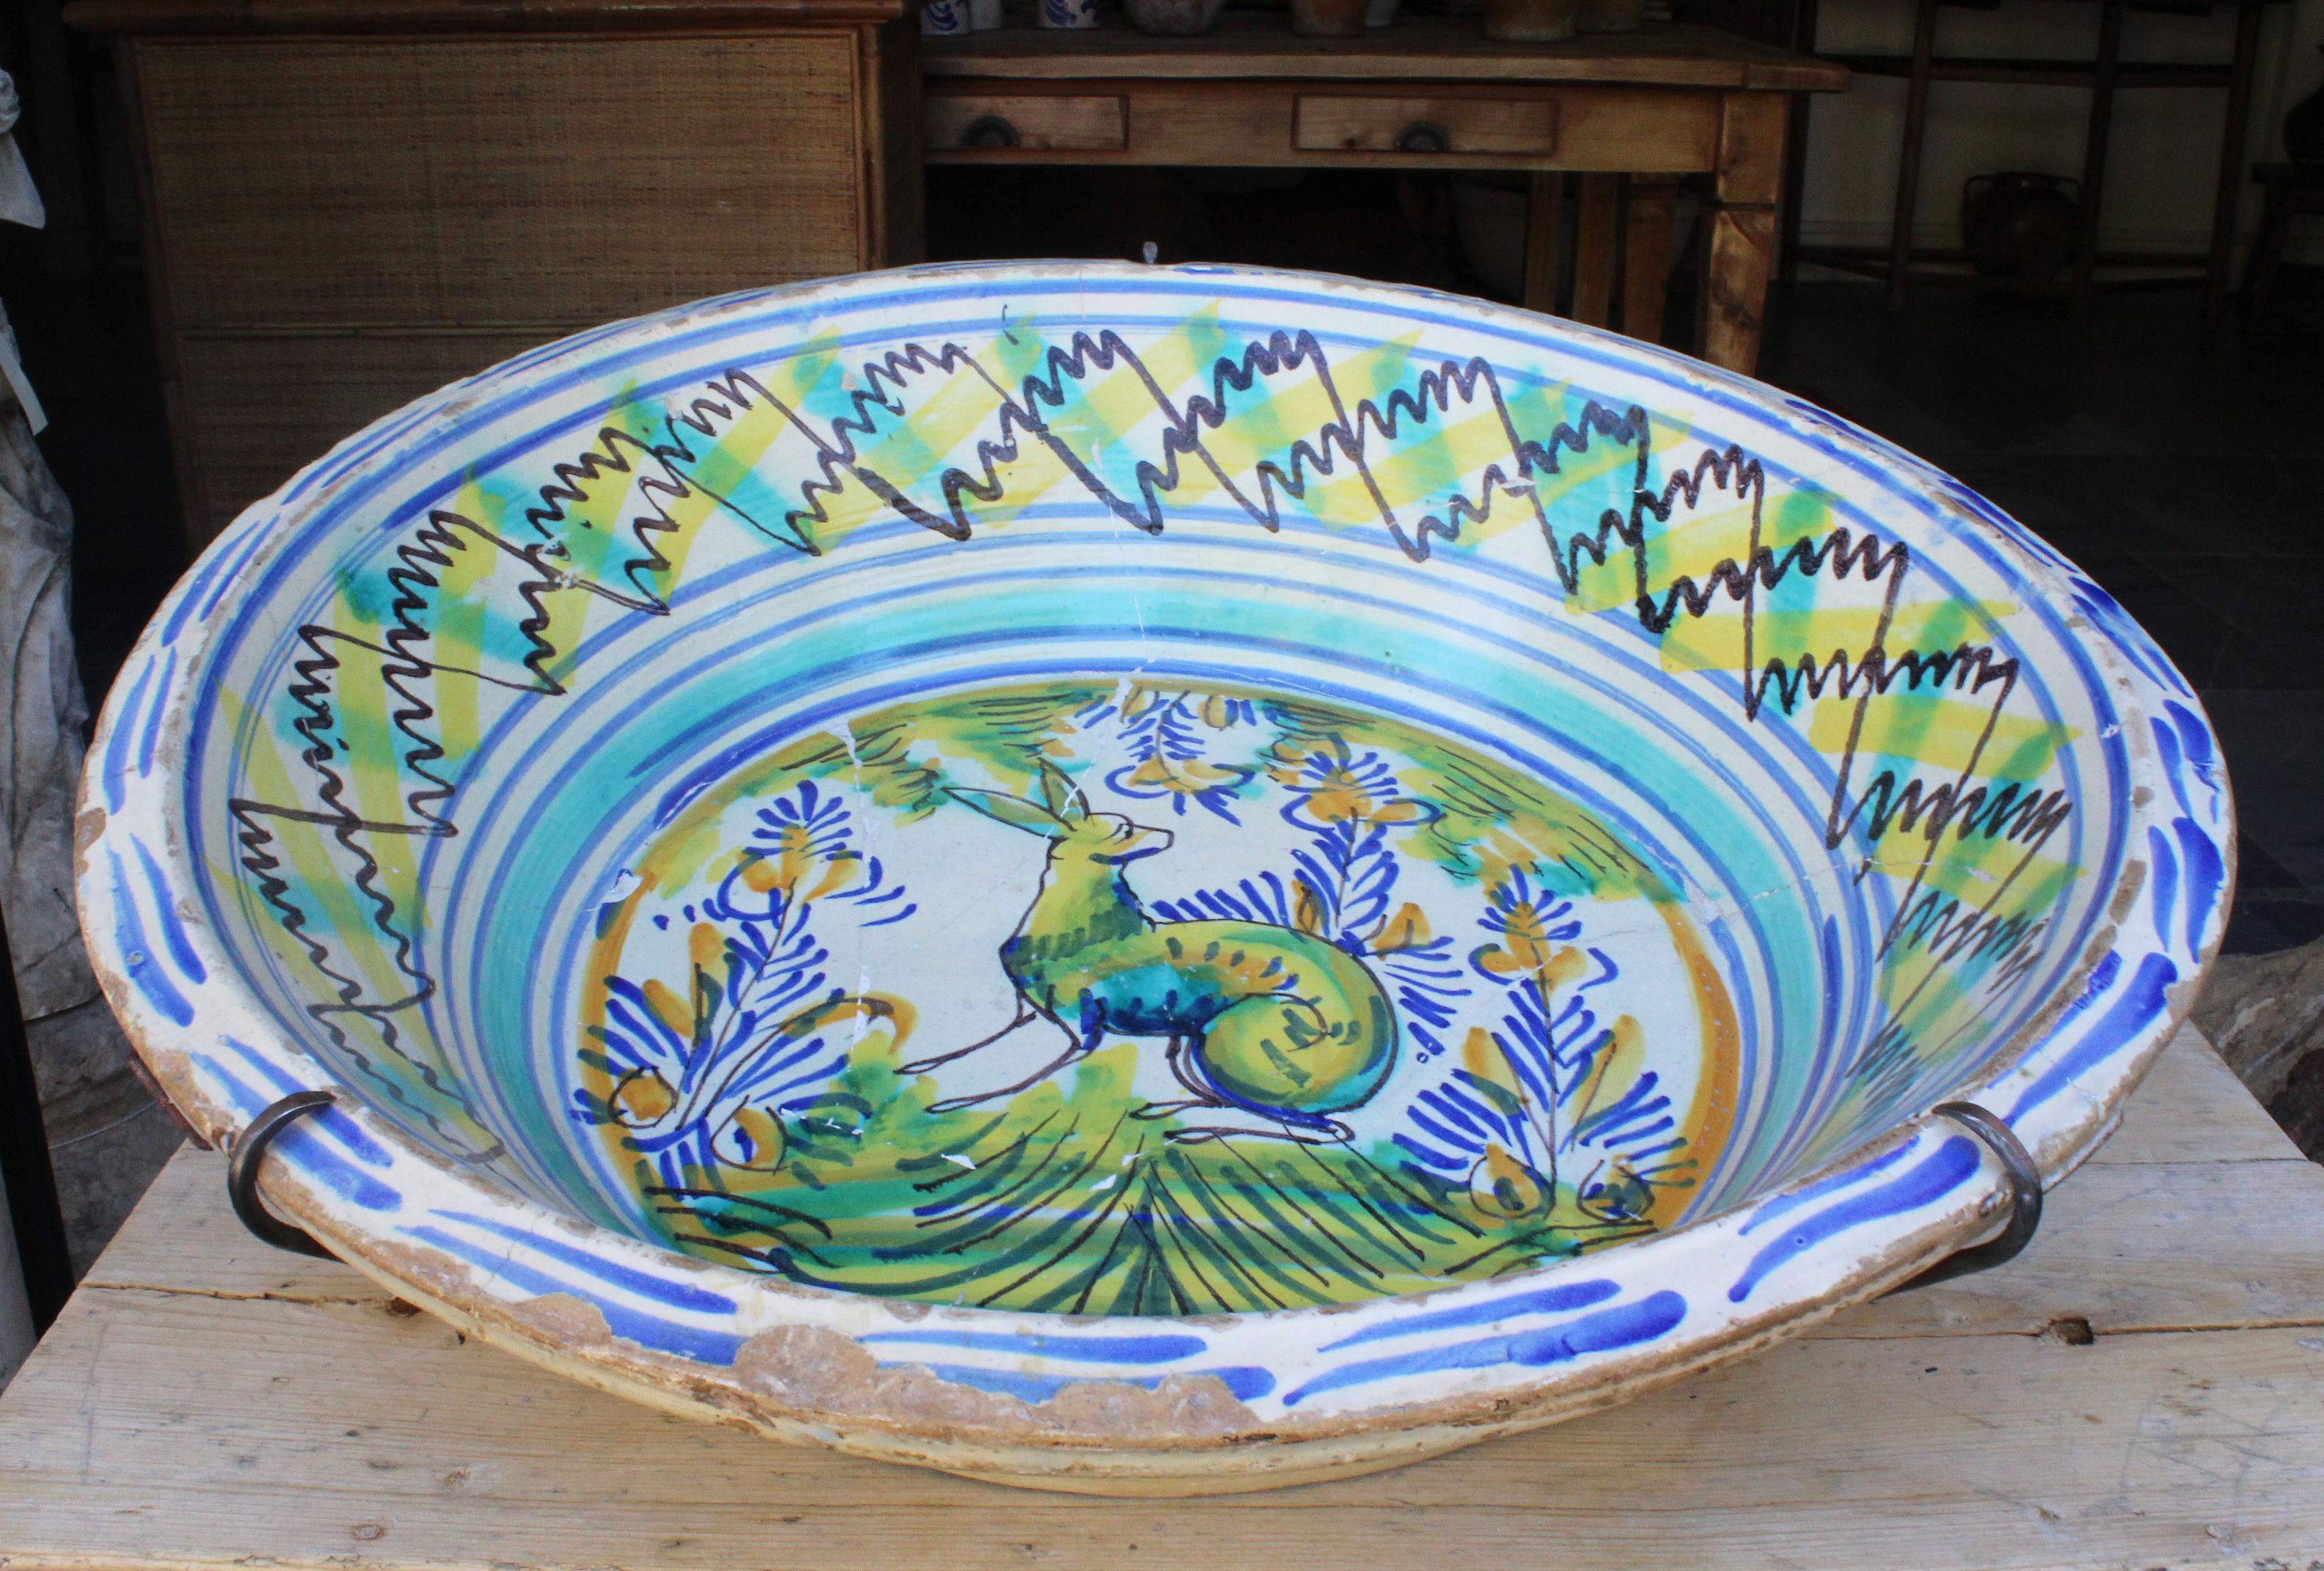 19th century Spanish Triana white, green, blue and yellow glazed terracotta plate.

Triana is a style that originates in Seville, known for its mix of Christian and Al-Andalus cultures.

With escenes of a town and trees in the middle and geometric